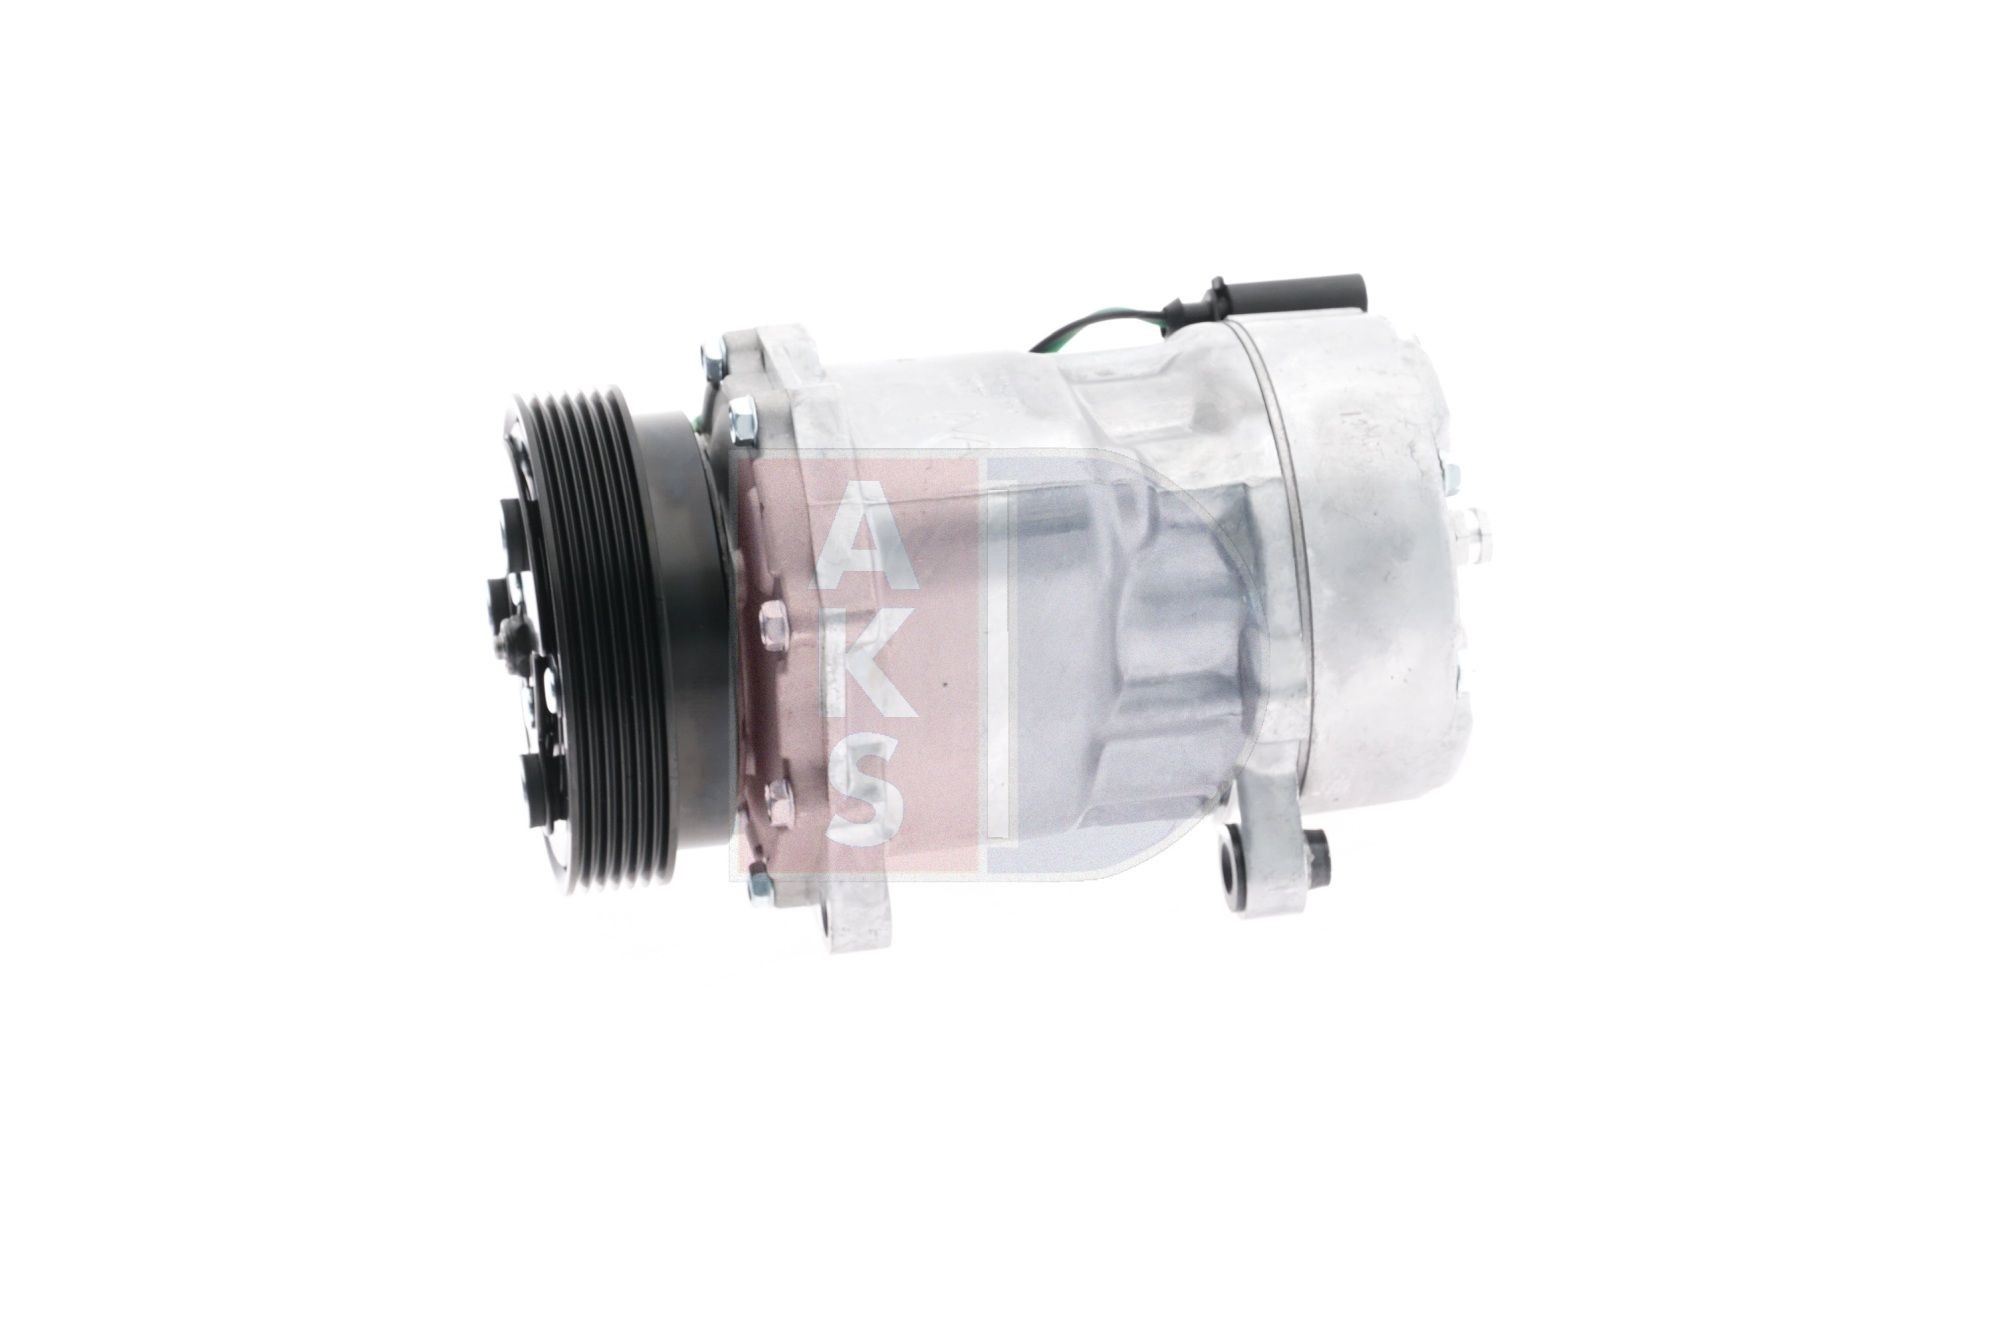 Air conditioning compressor 851770N from AKS DASIS